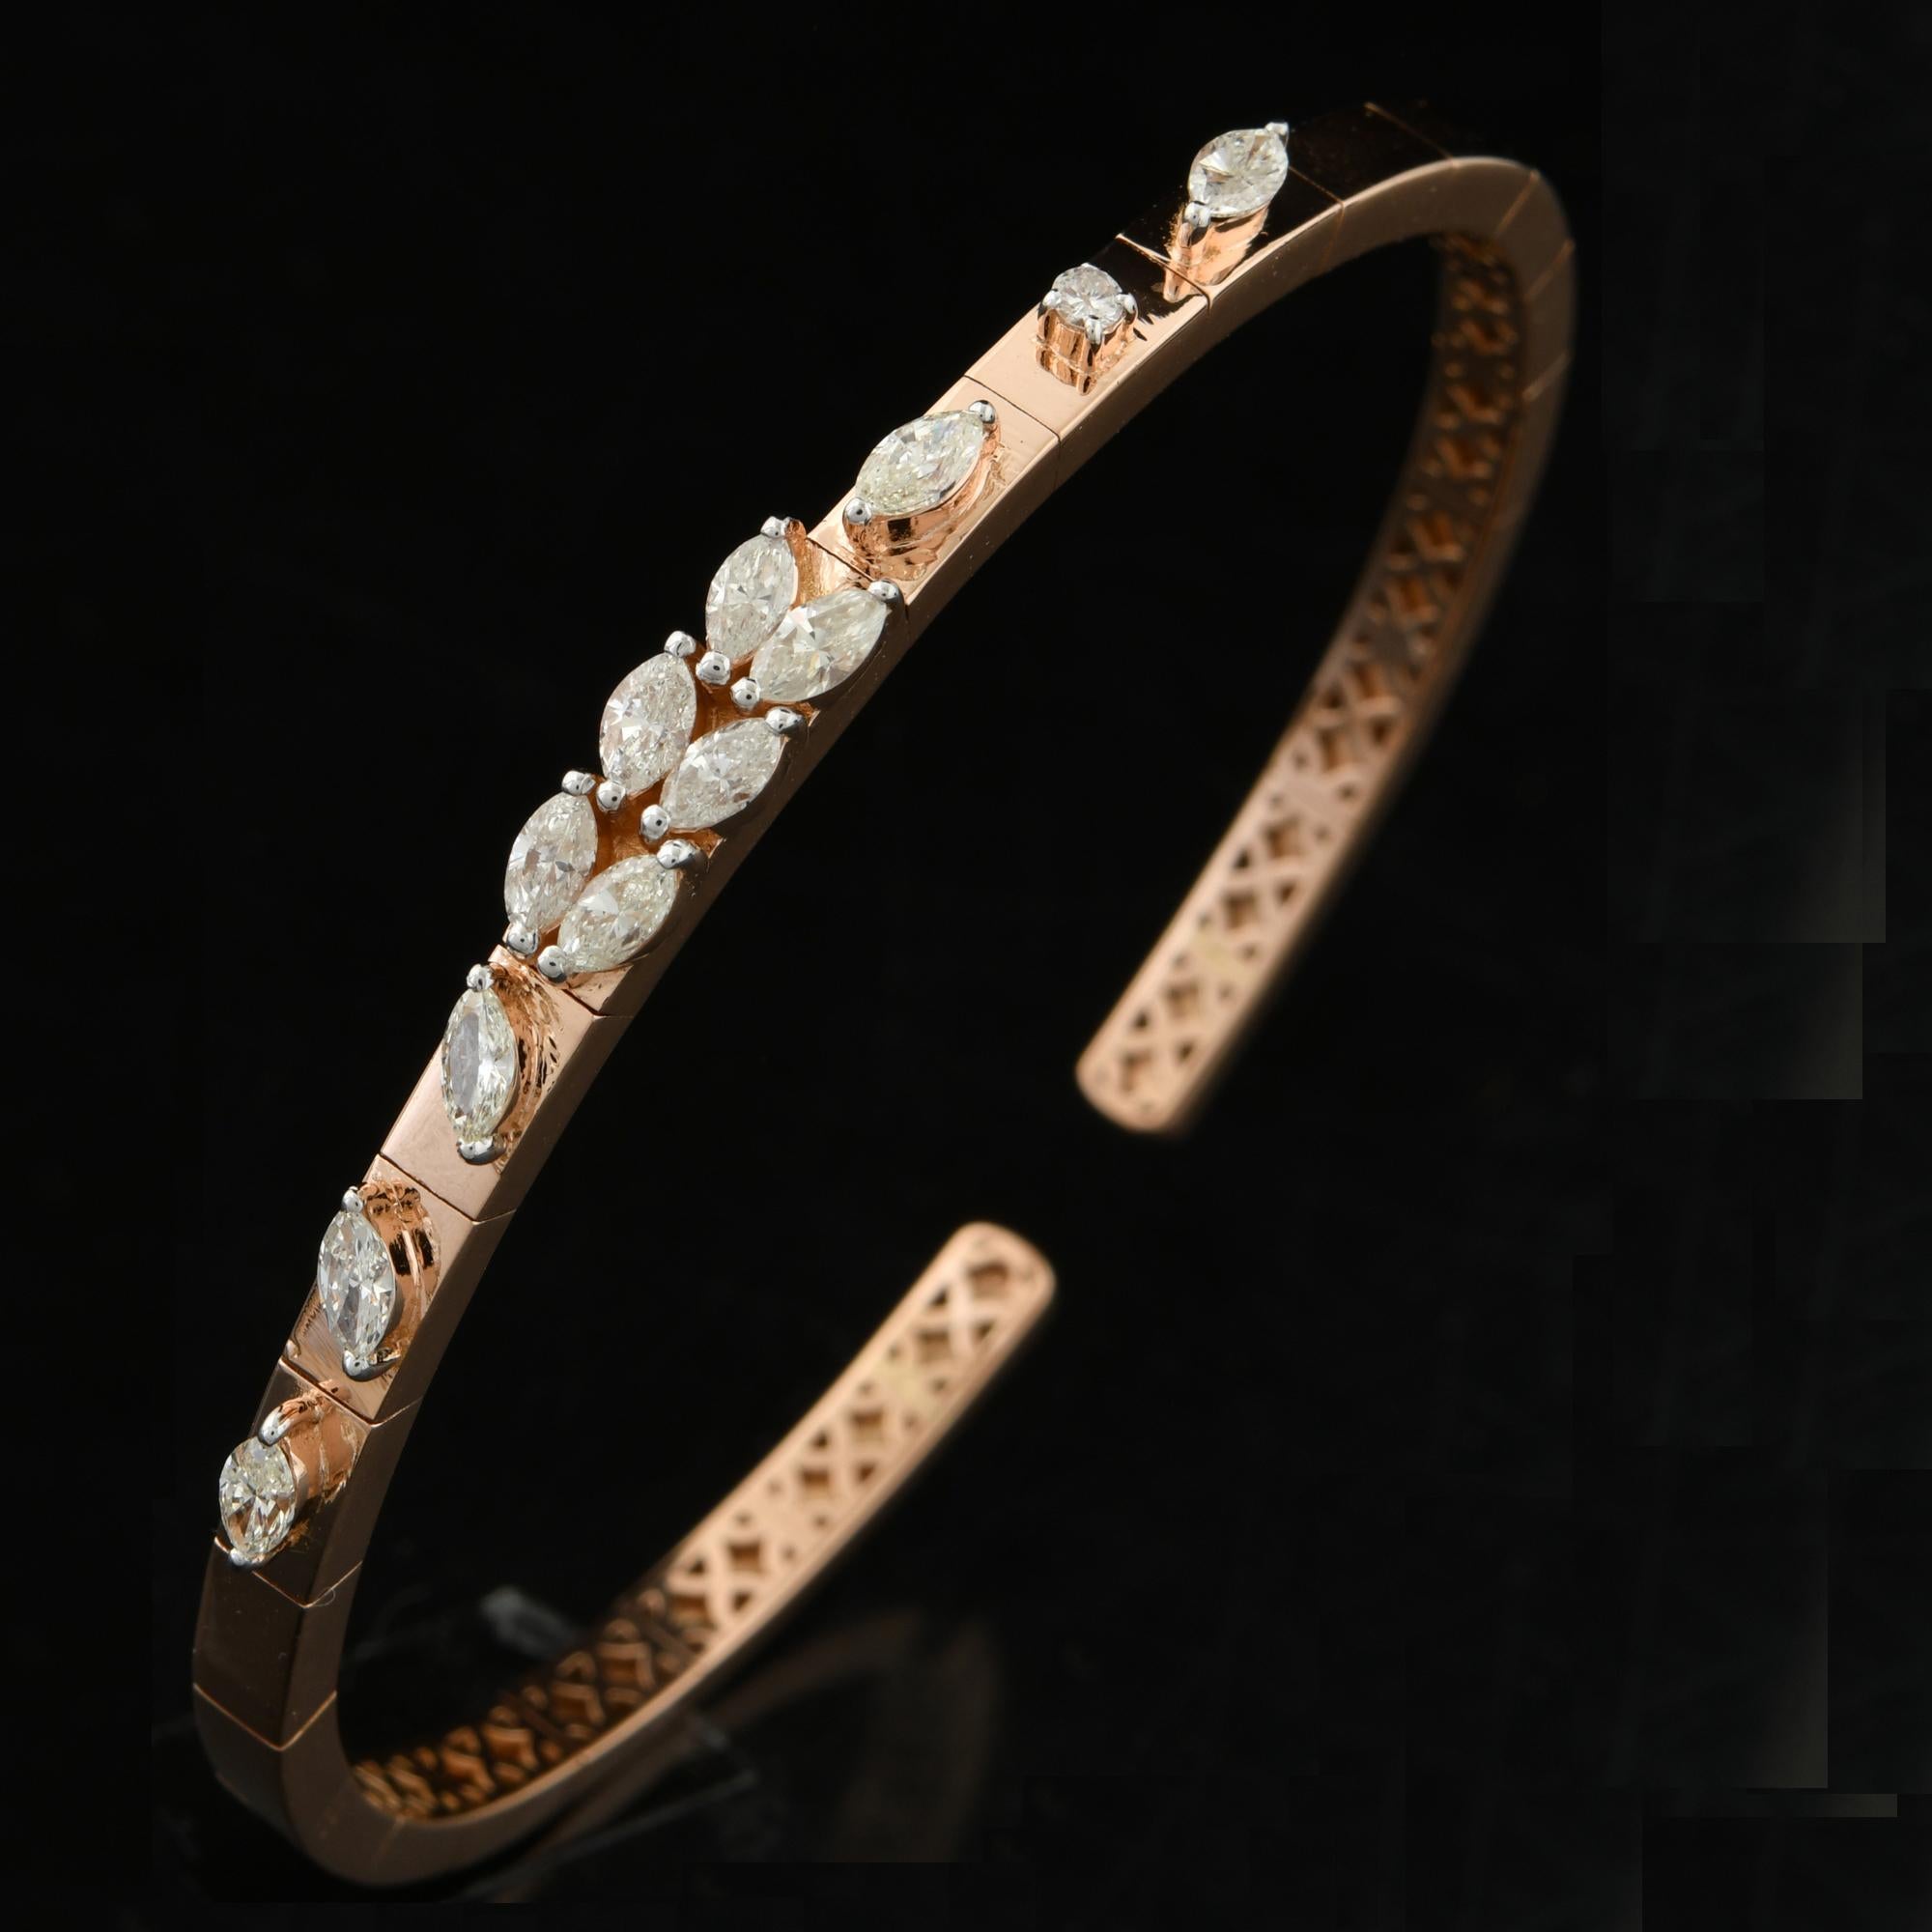 The bracelet features a sleek and modern design, with a cuff-style bangle that gracefully wraps around the wrist. The bangle is crafted from high-quality 18 karat yellow gold, renowned for its rich and warm hue. The gold has been expertly polished